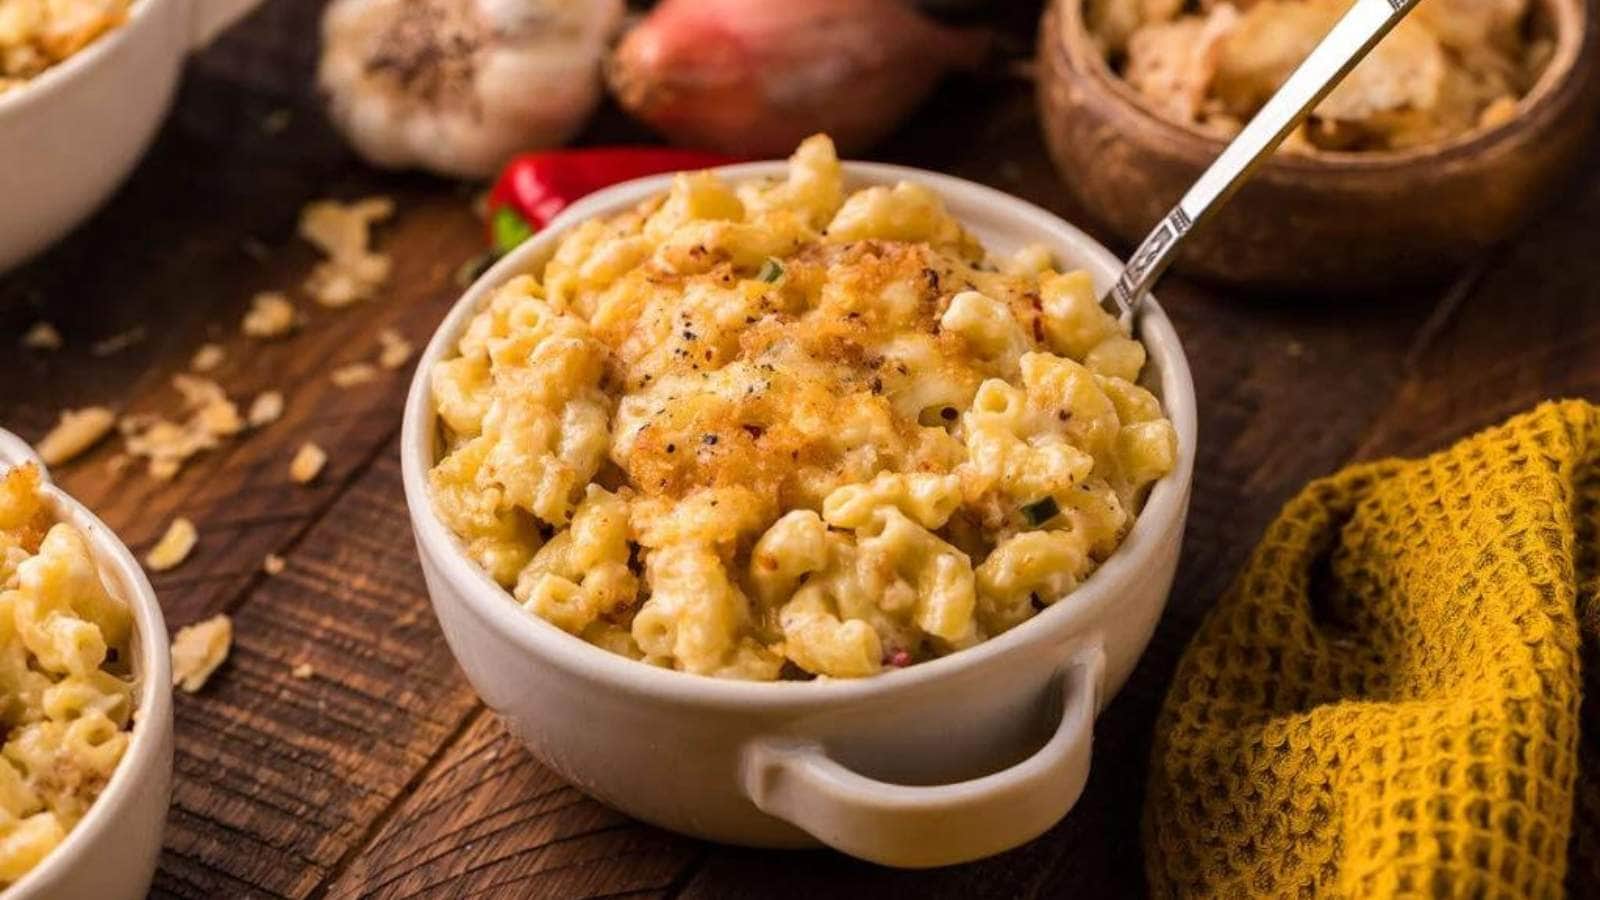 Smoked Gouda Mac and Cheese with Pancetta recipe by Xoxo Bella.